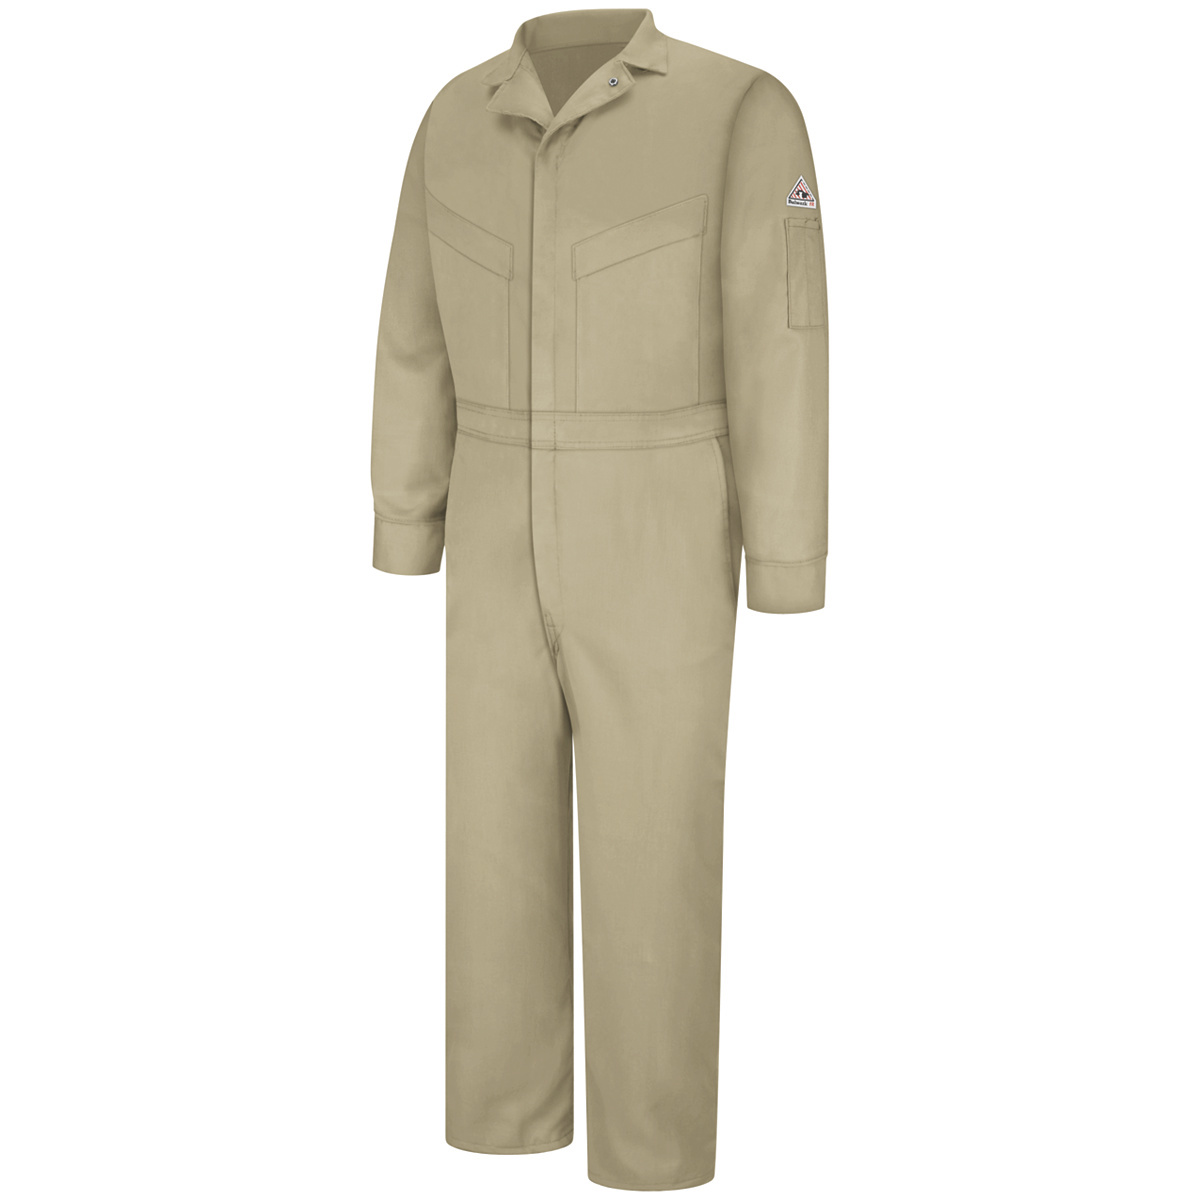 Bulwark® 42 Regular Khaki EXCEL FR® ComforTouch® Sateen/Cotton/Nylon Water Repellent Flame Resistant Coveralls With Zipper Front